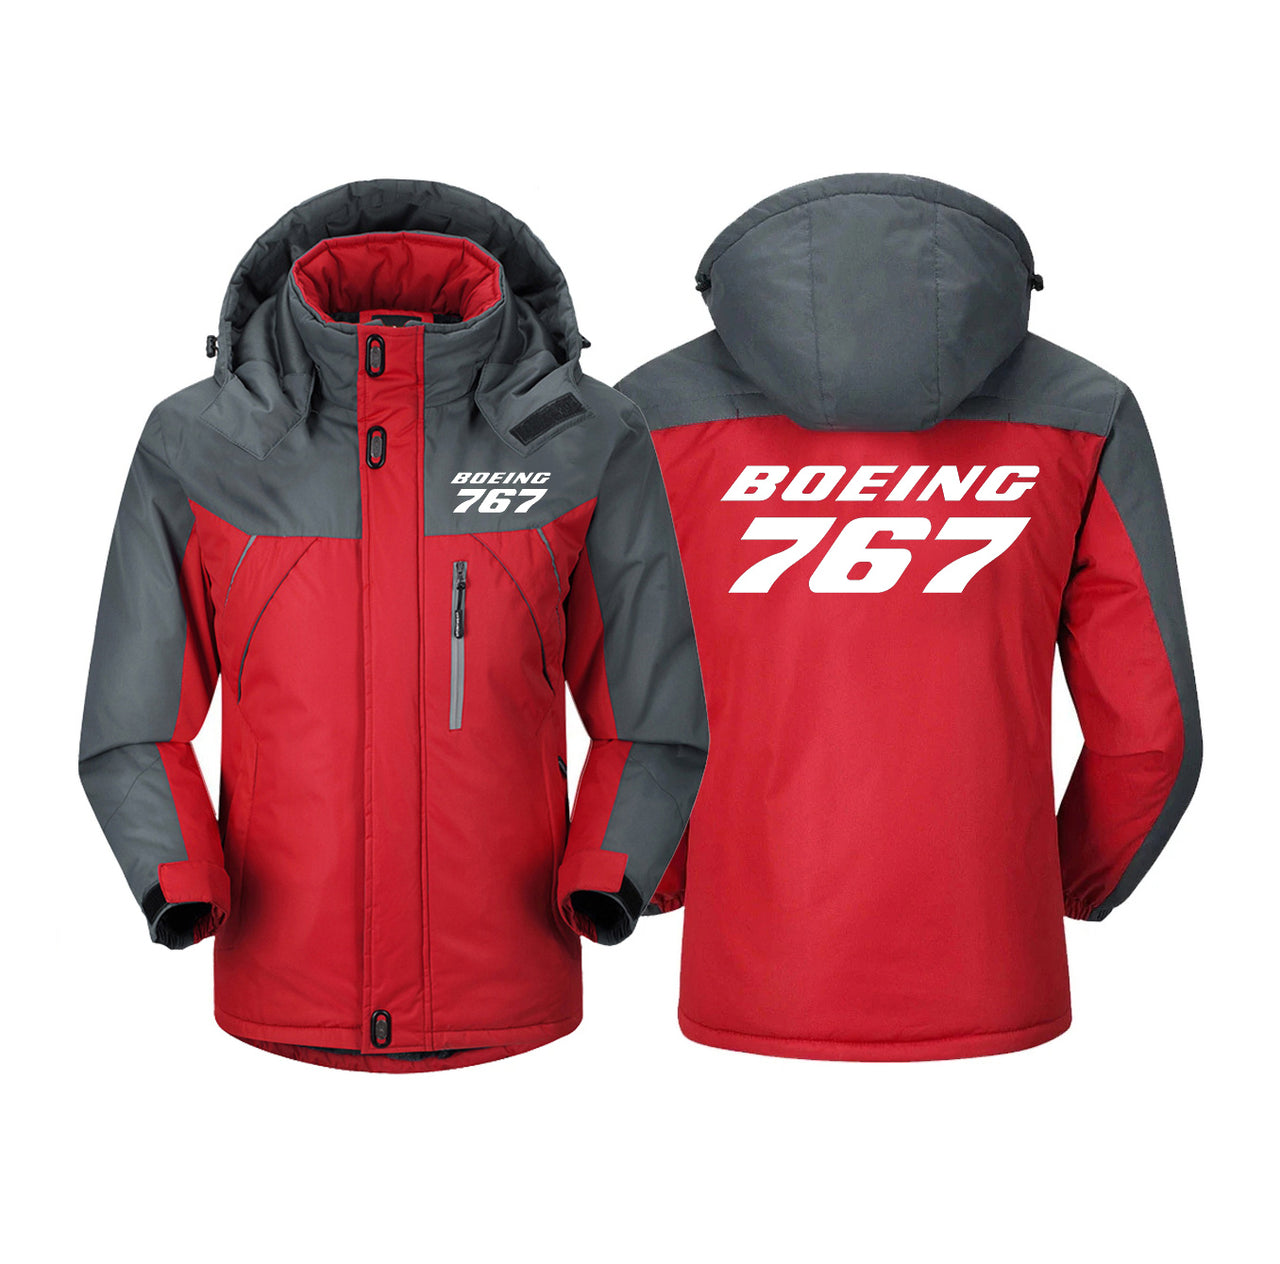 Boeing 767 & Text Designed Thick Winter Jackets